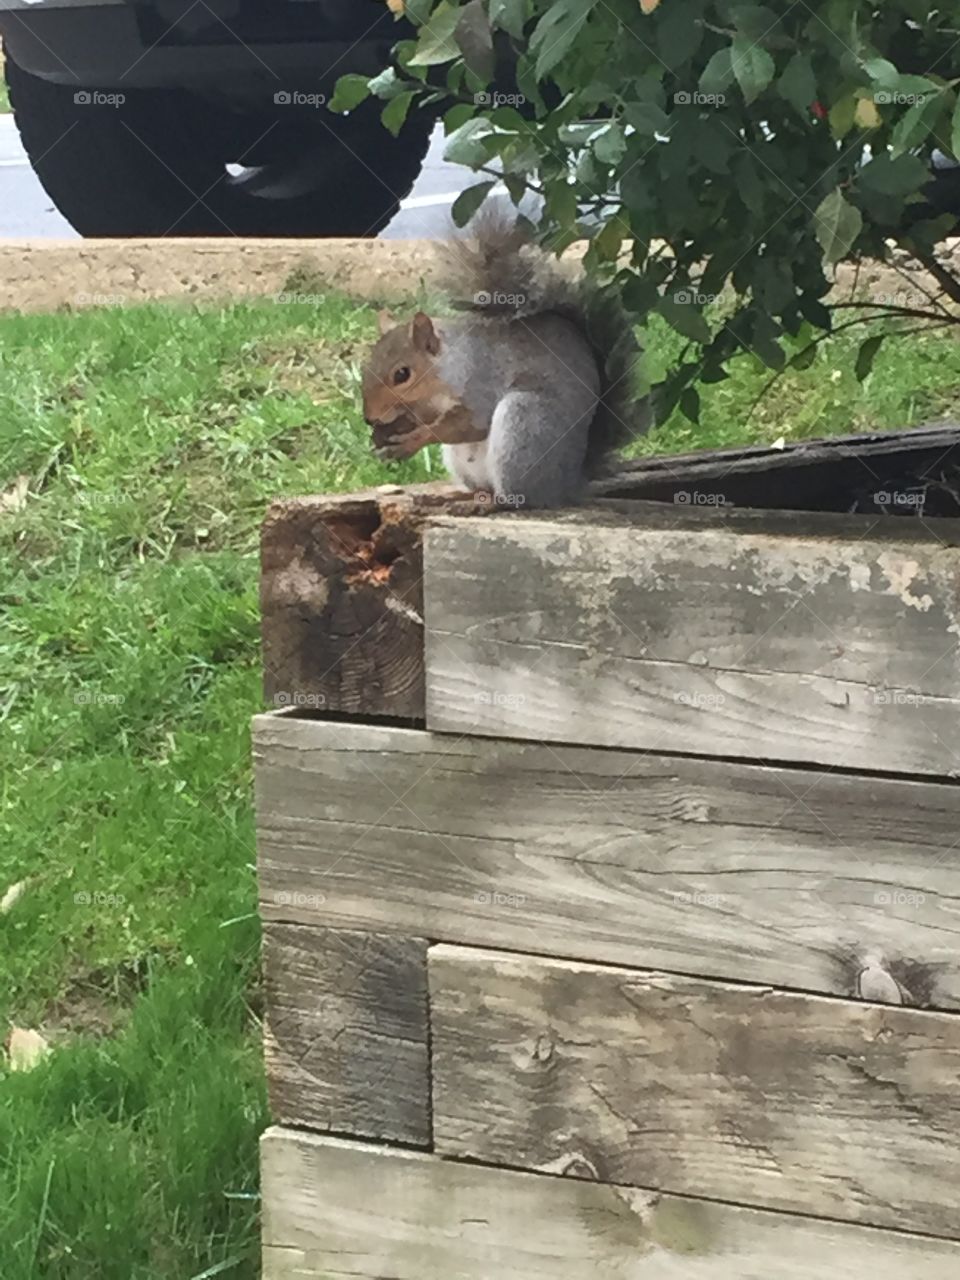 Just a squirrel looking for his nut